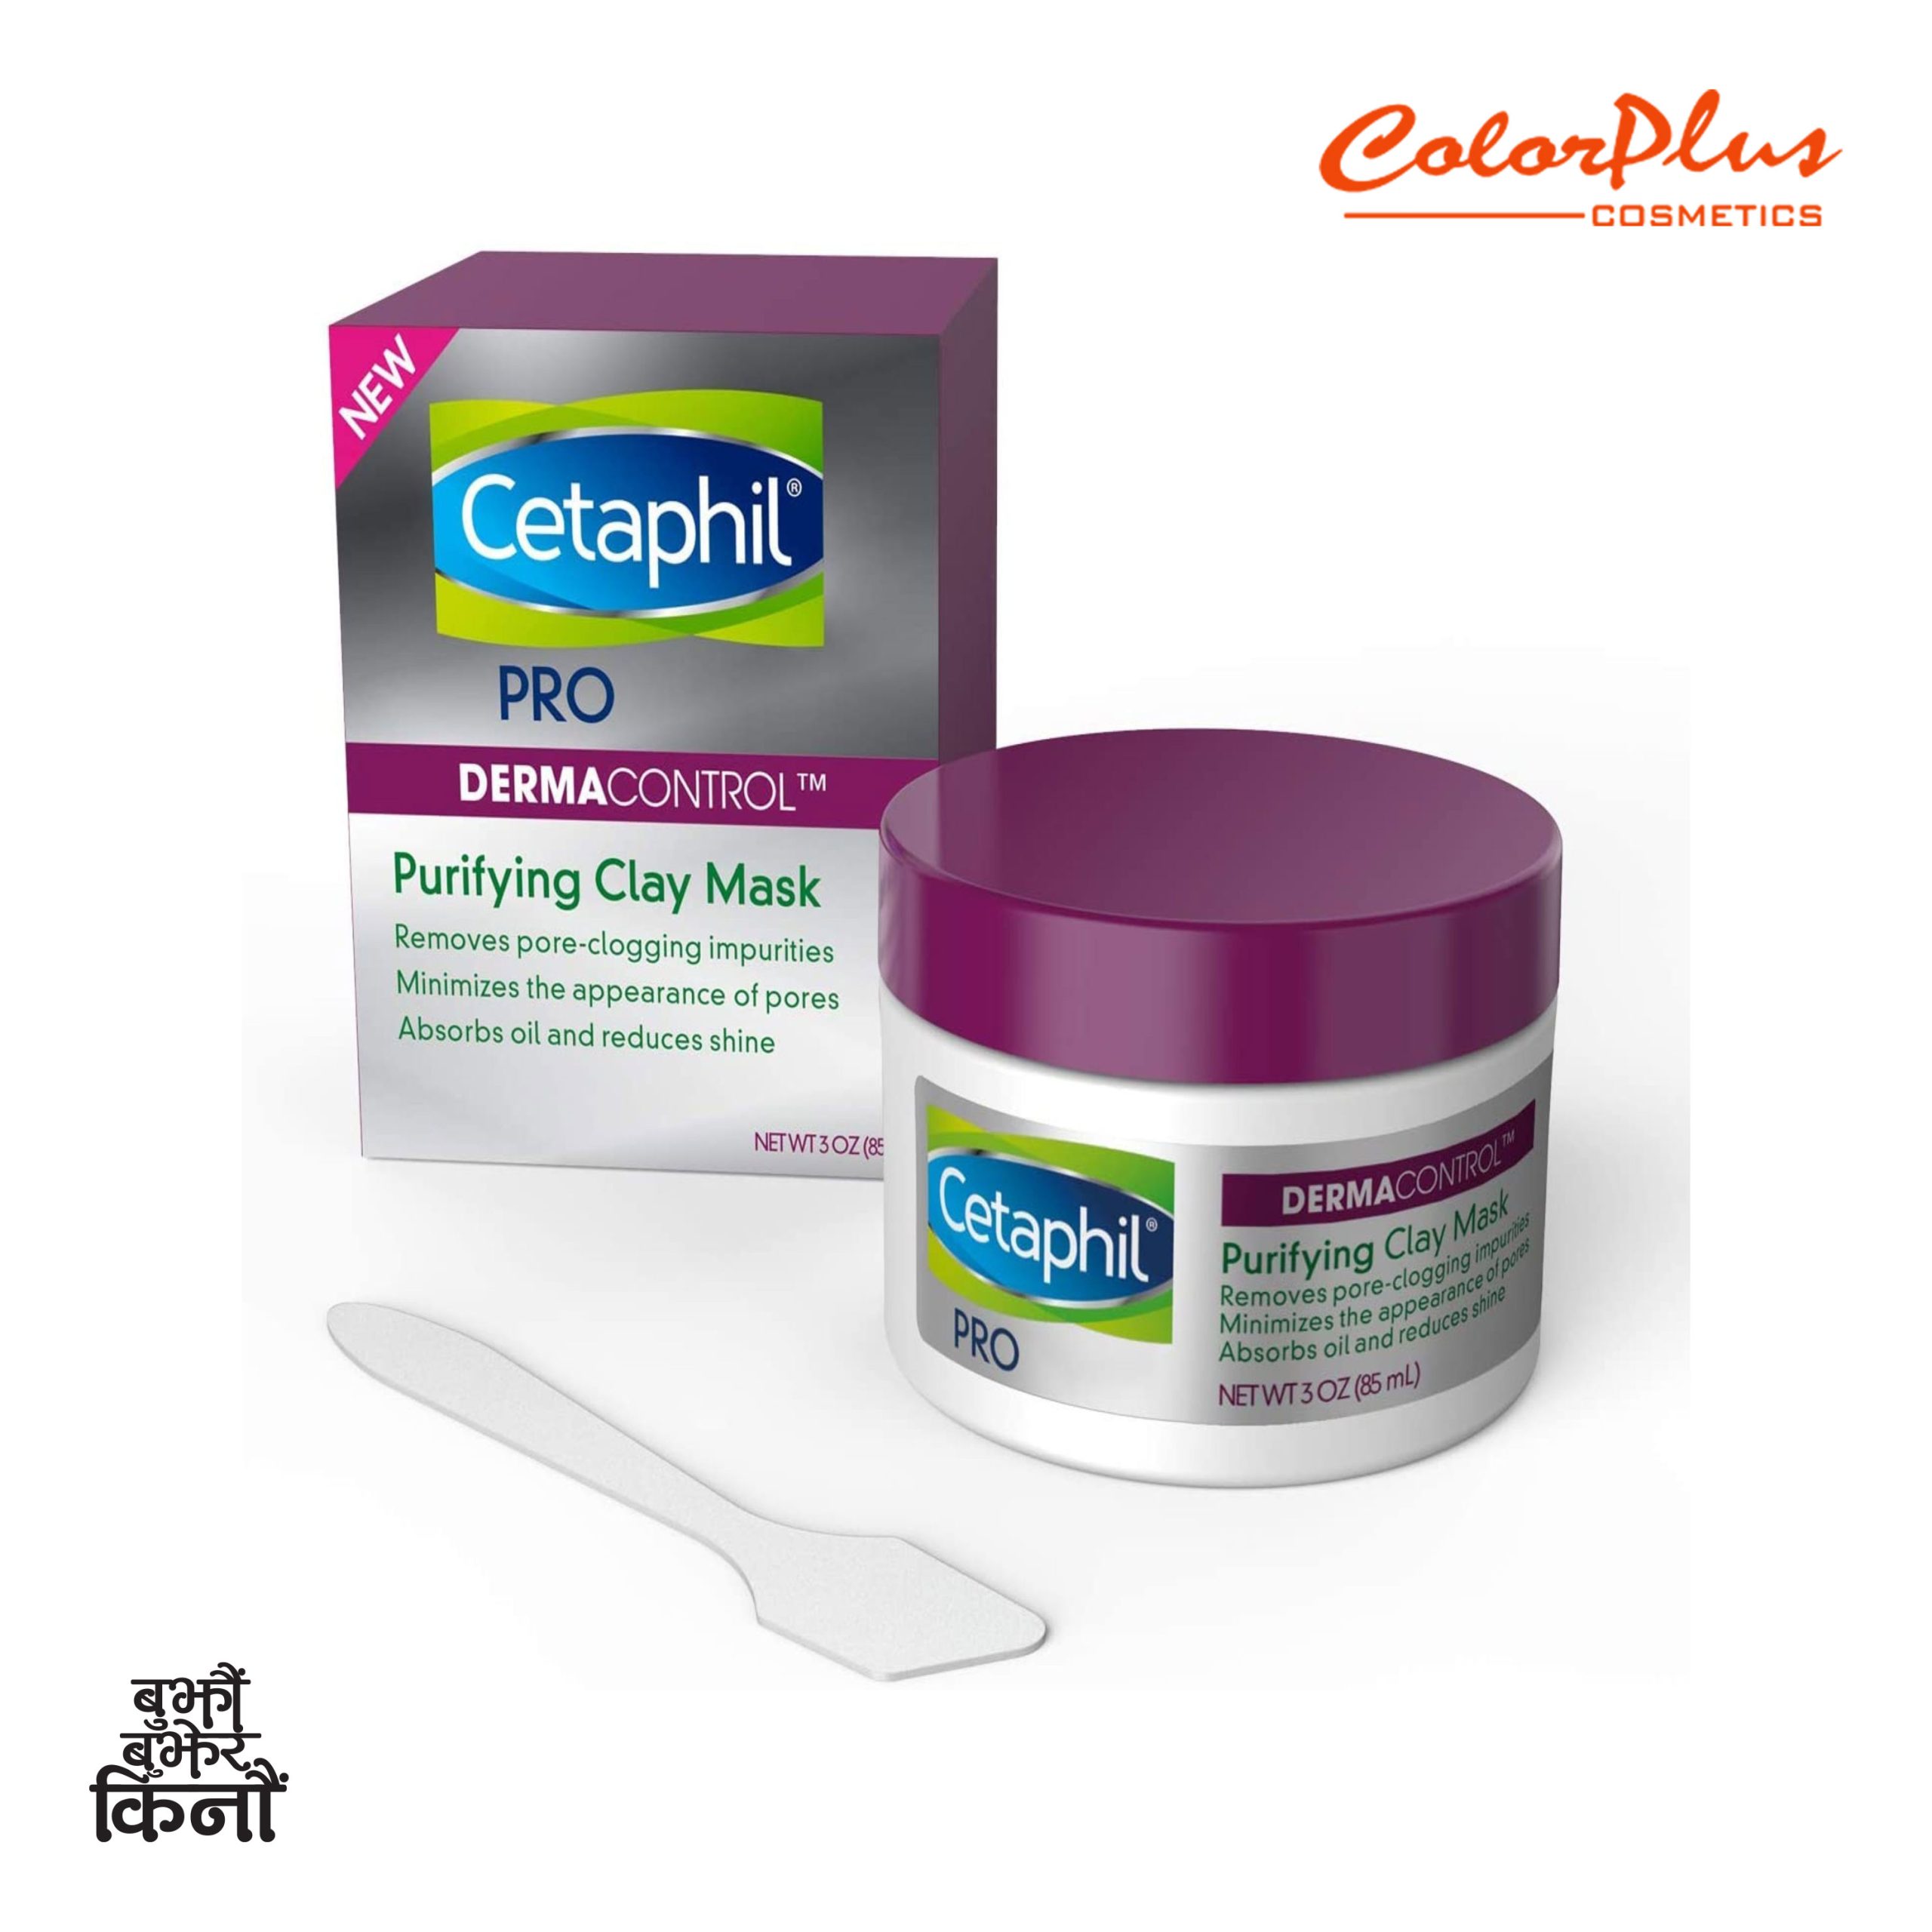 ColorPlus Cosmetics Cetaphil purifying clay mask scaled